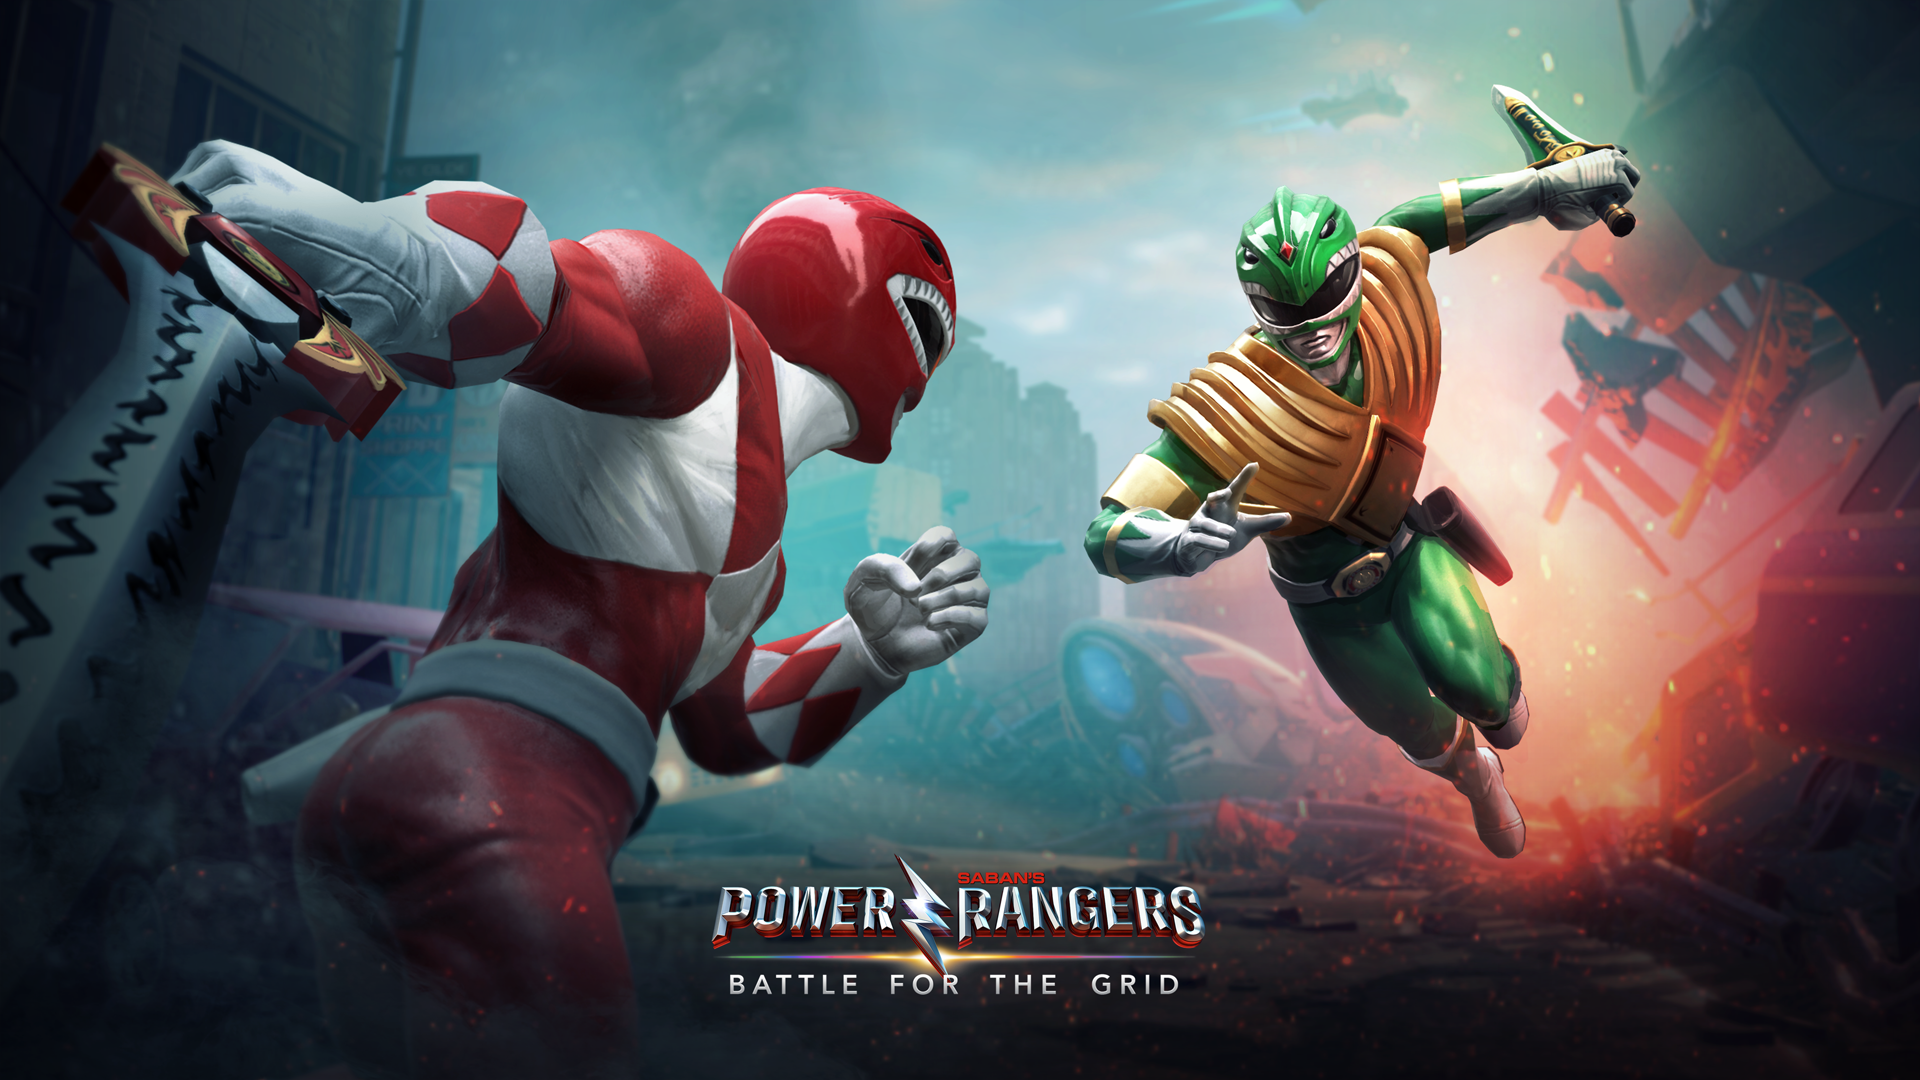 Power Rangers: Battle for the Grid announced for consoles